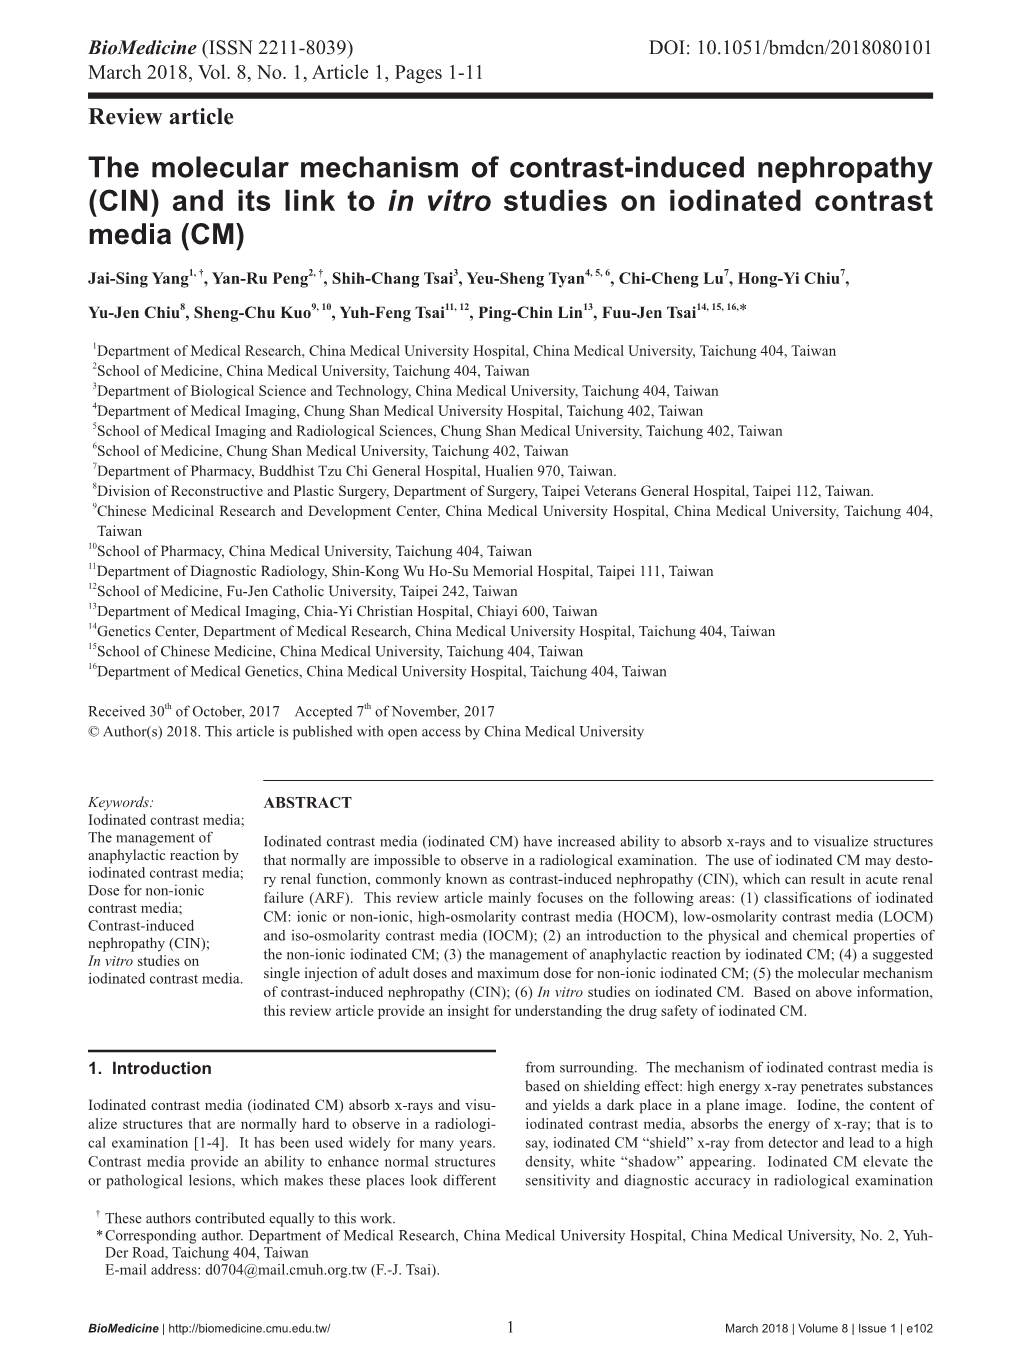 CIN) and Its Link to in Vitro Studies on Iodinated Contrast Media (CM